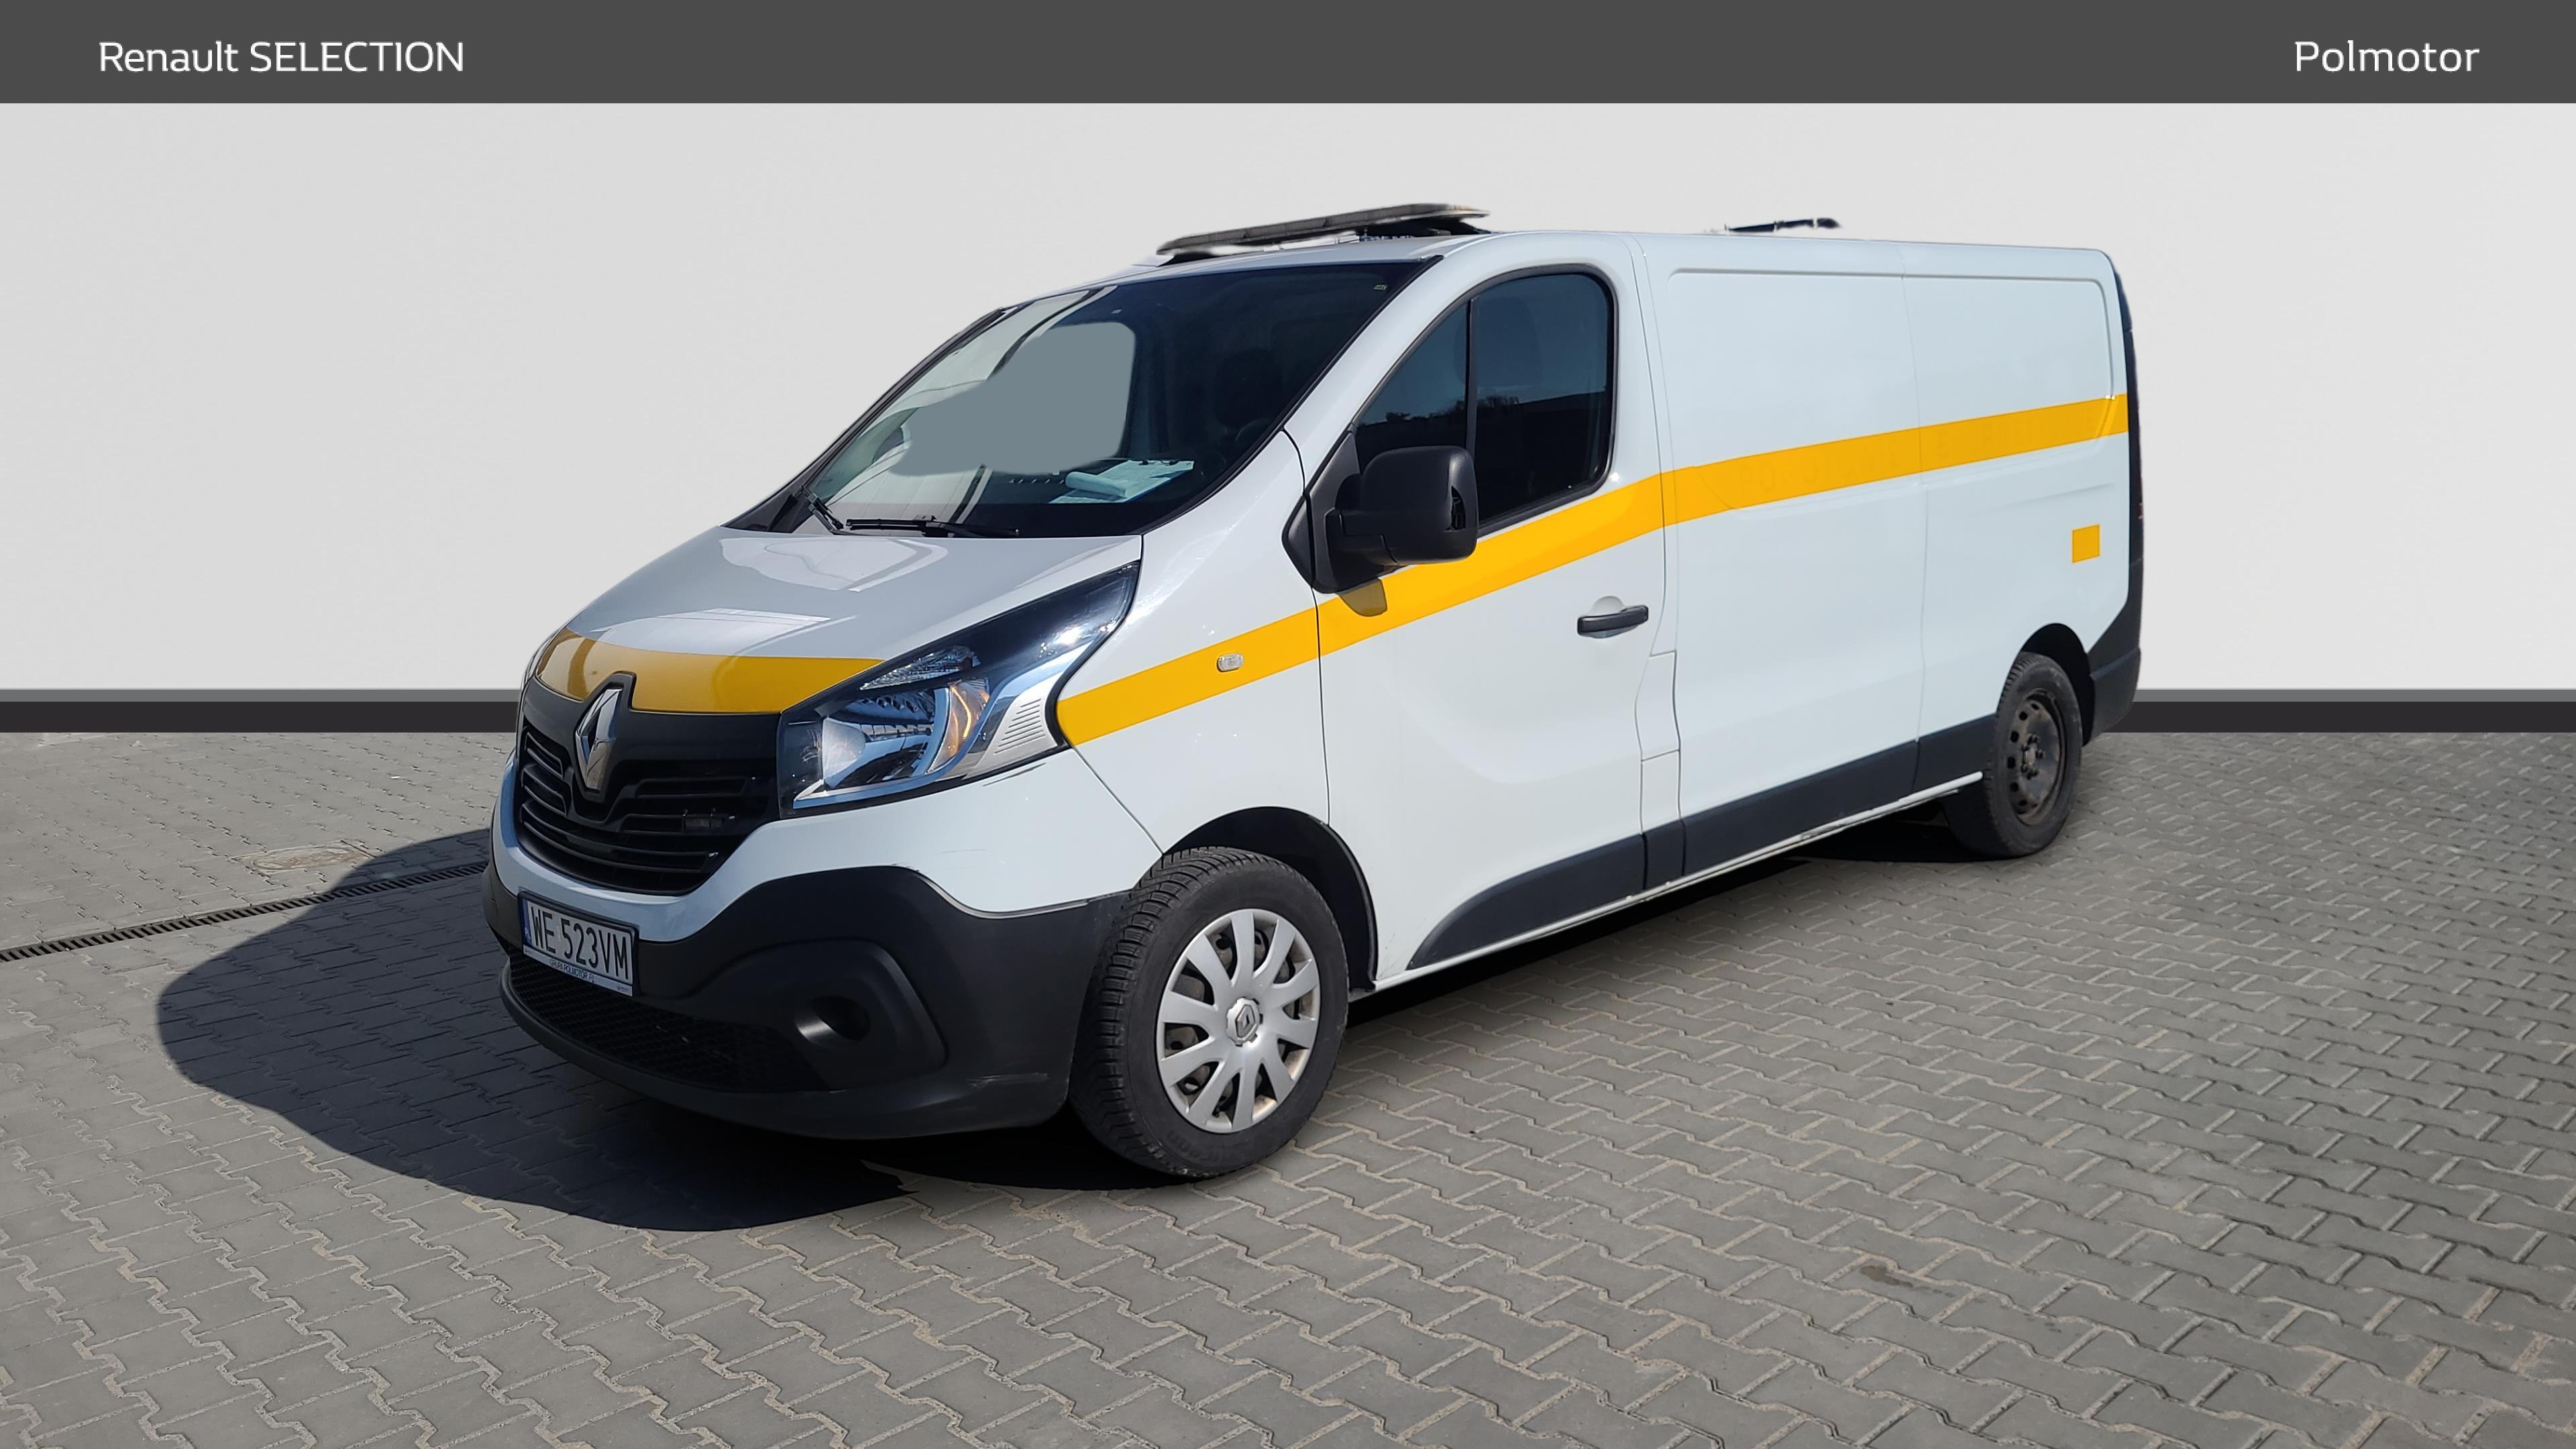 Renault TRAFIC Trafic L2H1 2,9t Pack Clim 2018